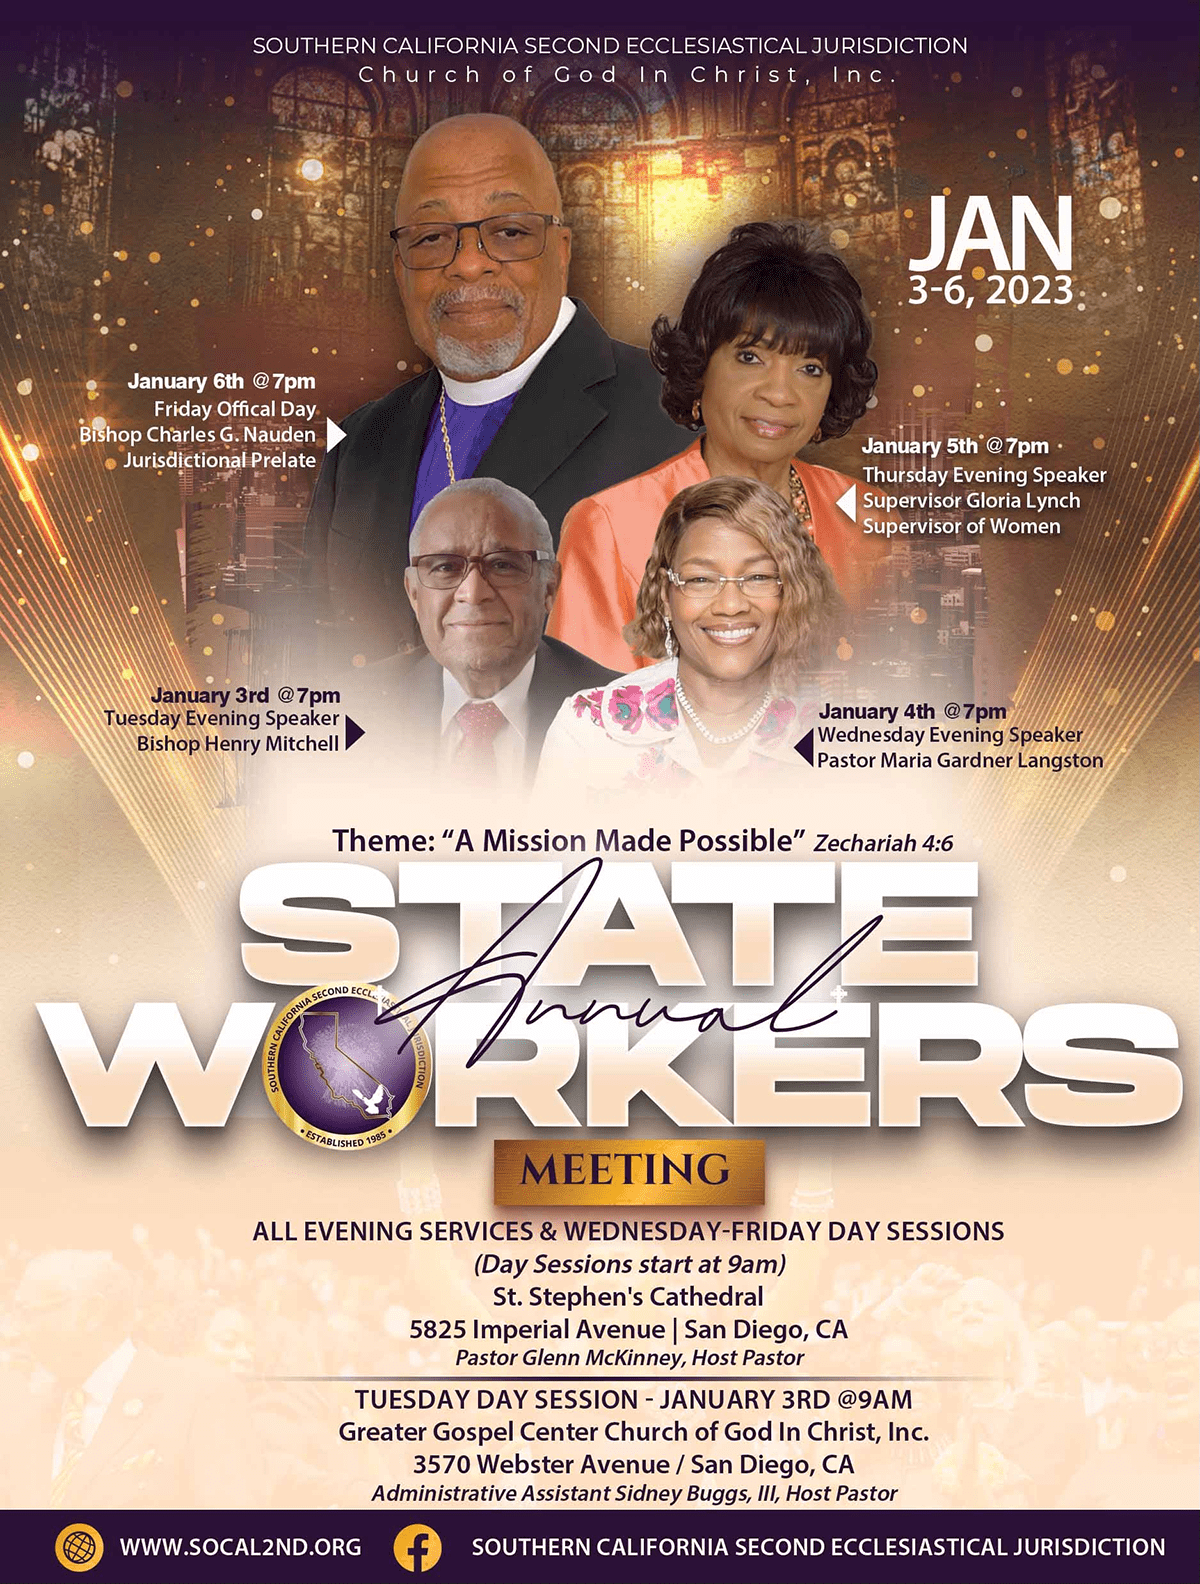 2023 Workers’ Meeting – Southern California 2nd Ecclesiastical Jurisdiction